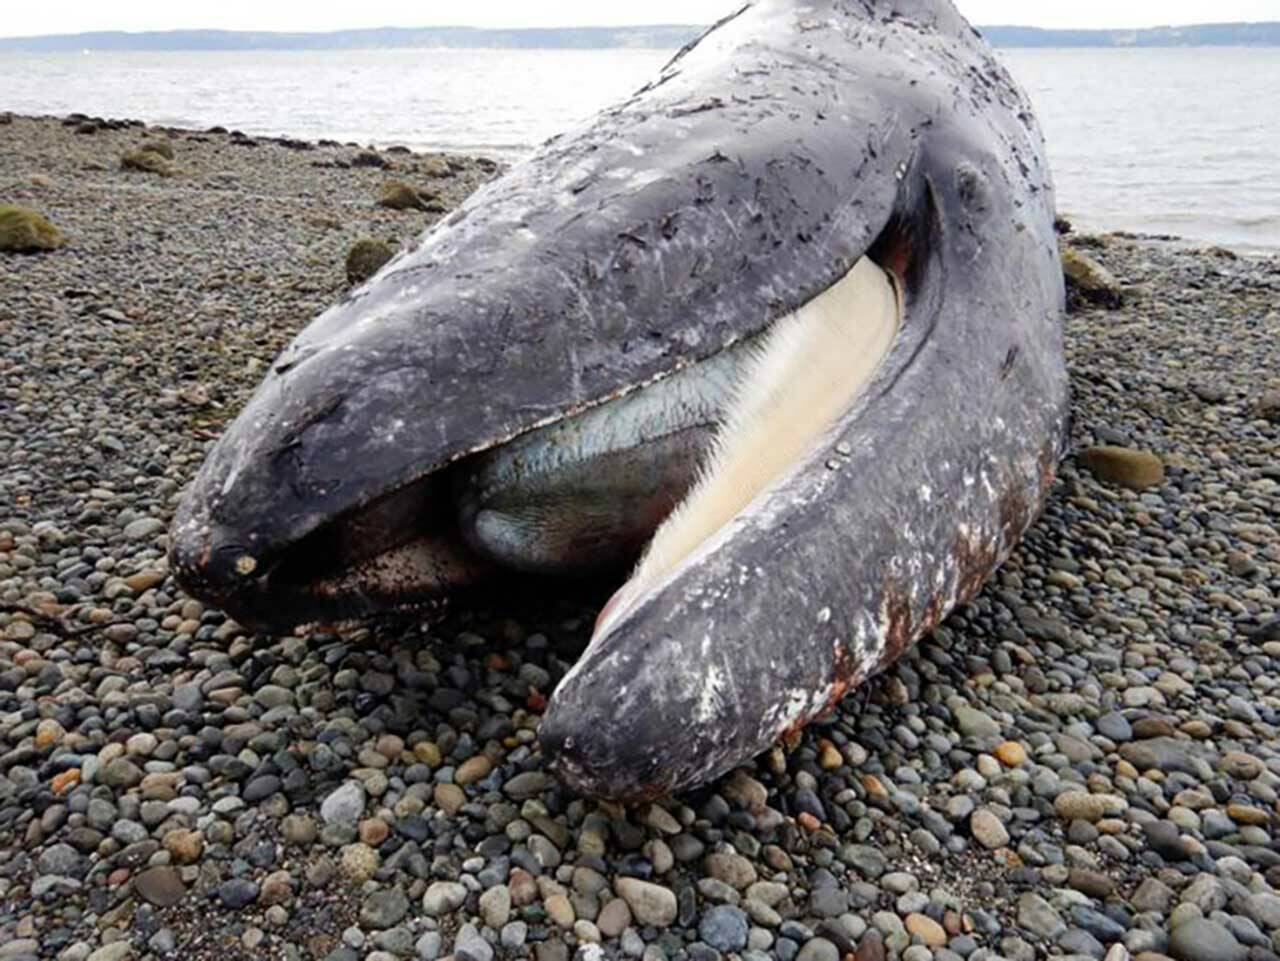 The gray whale found dead on a northwest Camano Island beach on March 31. (Cascadia Research Collective)